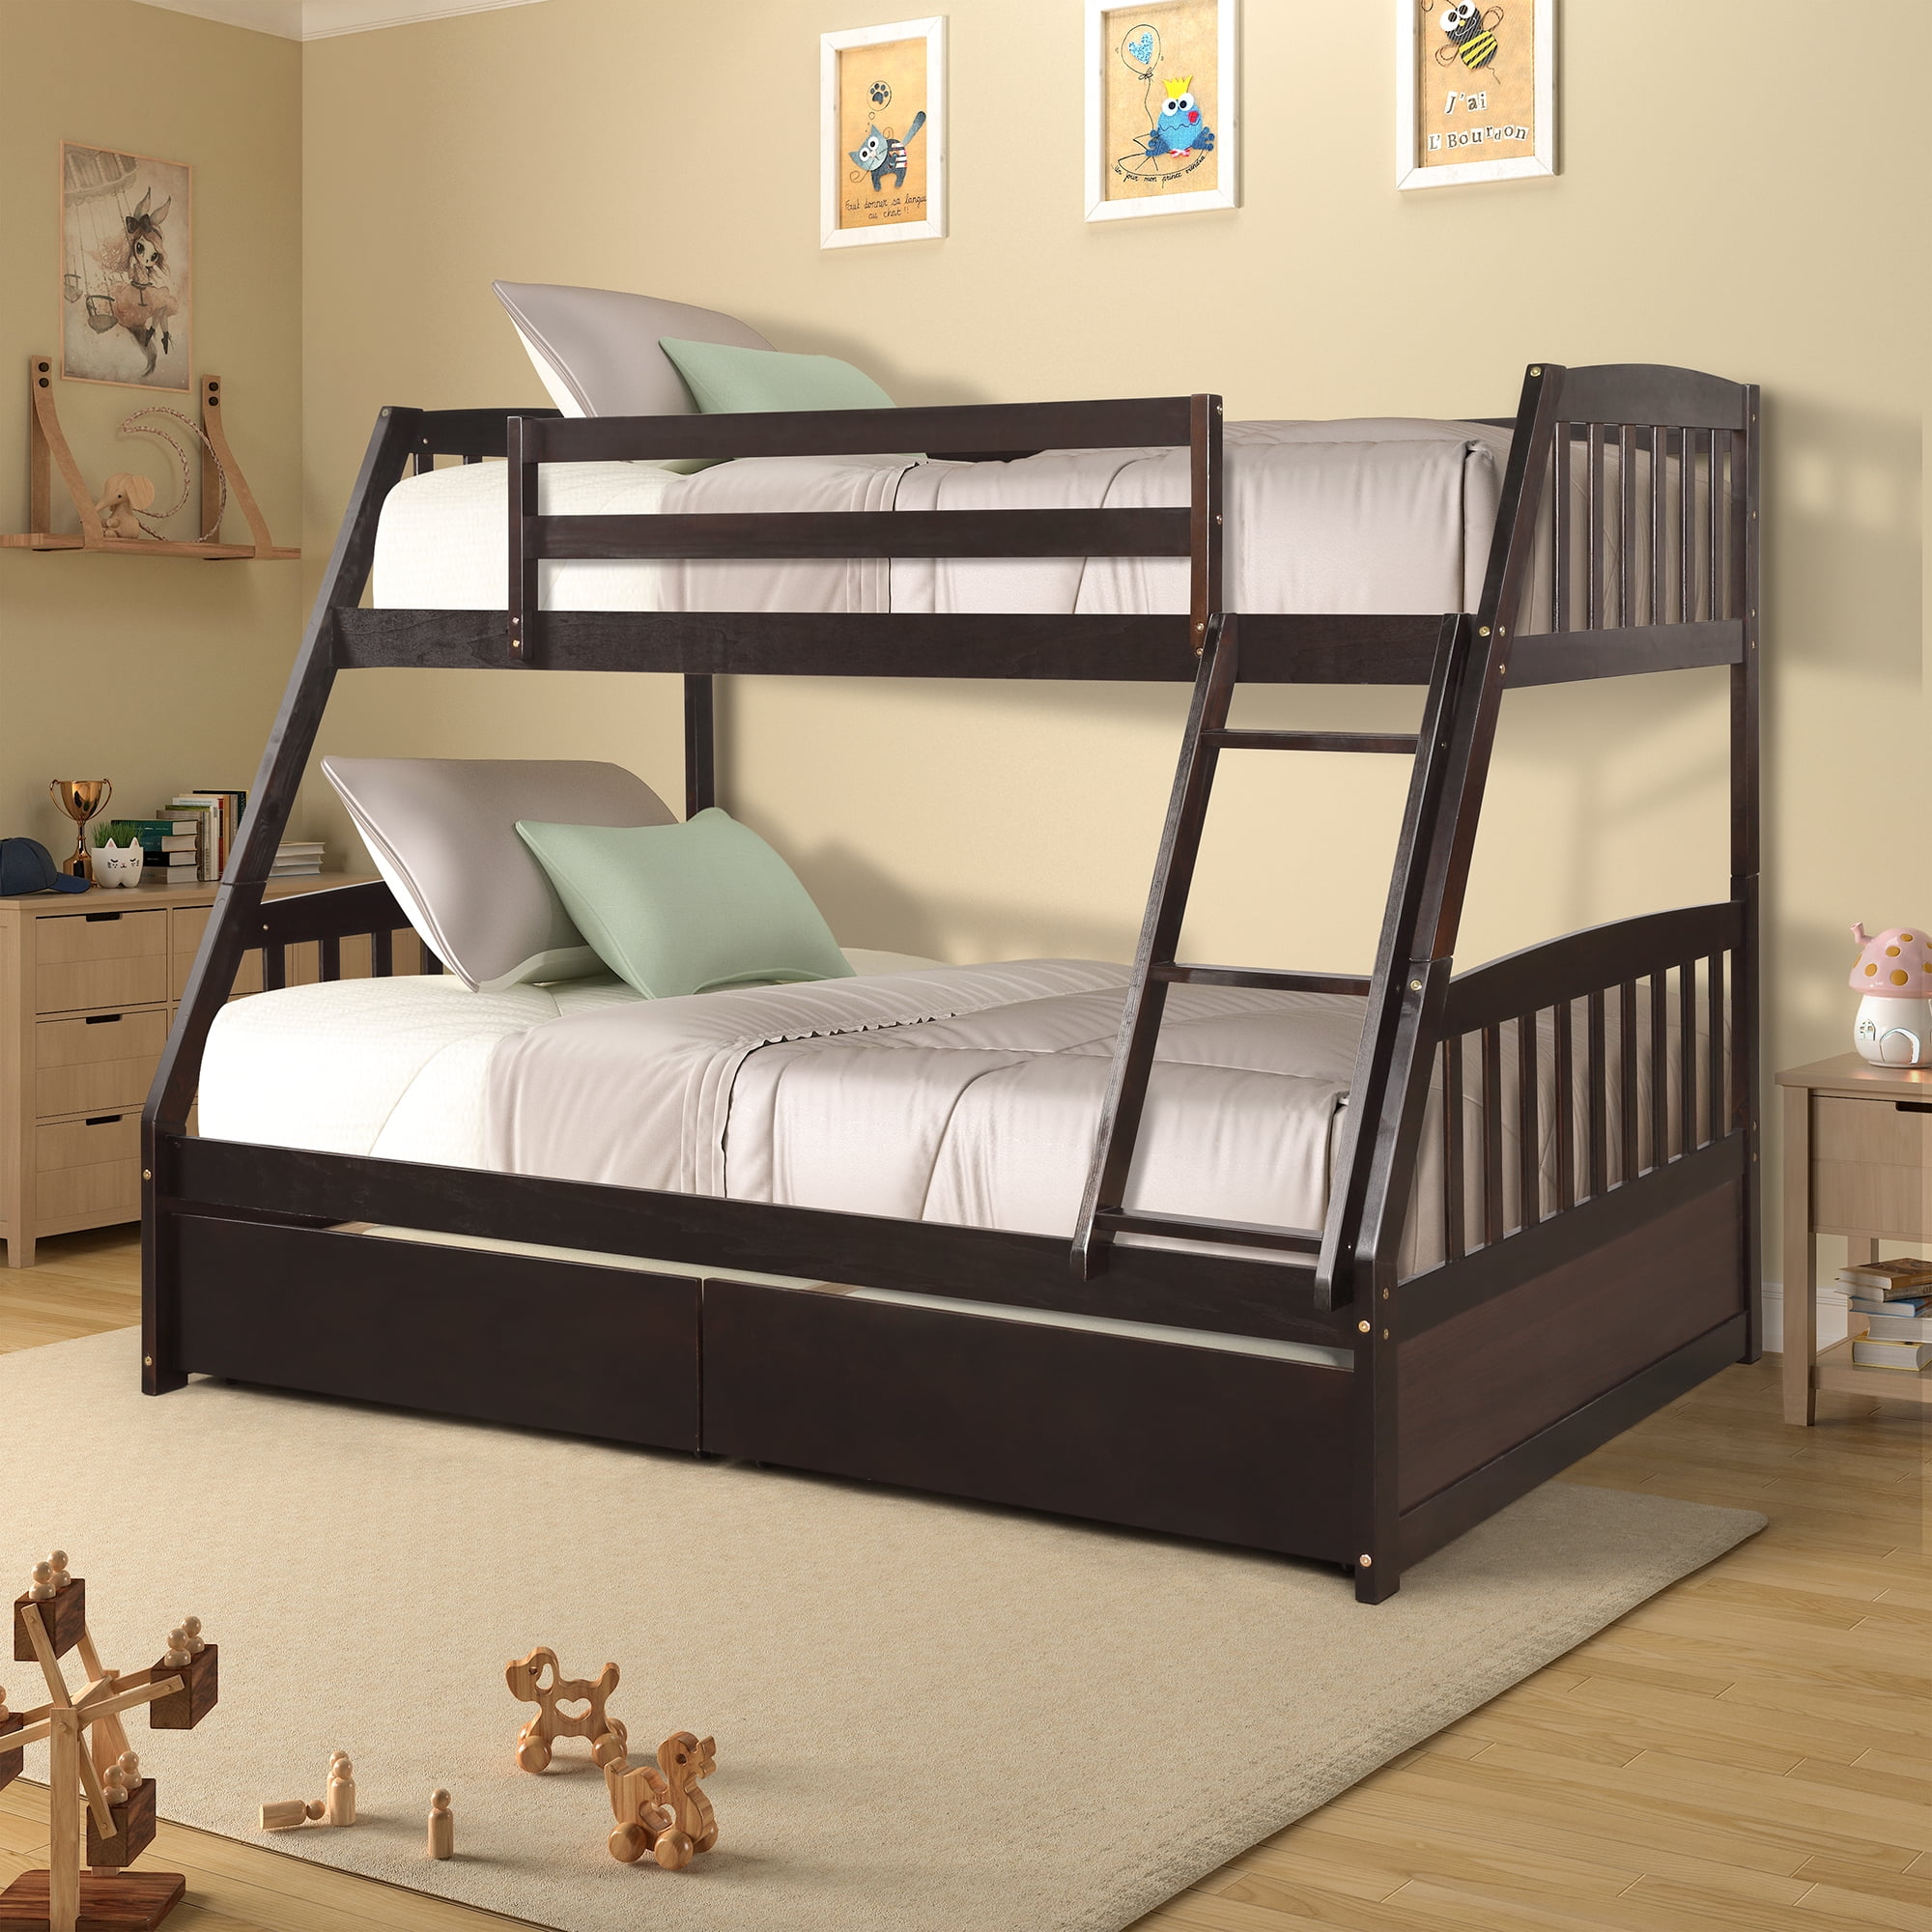 Kids Twin Over Full Bunk Beds Solid, Childrens Bunk Beds That Separate